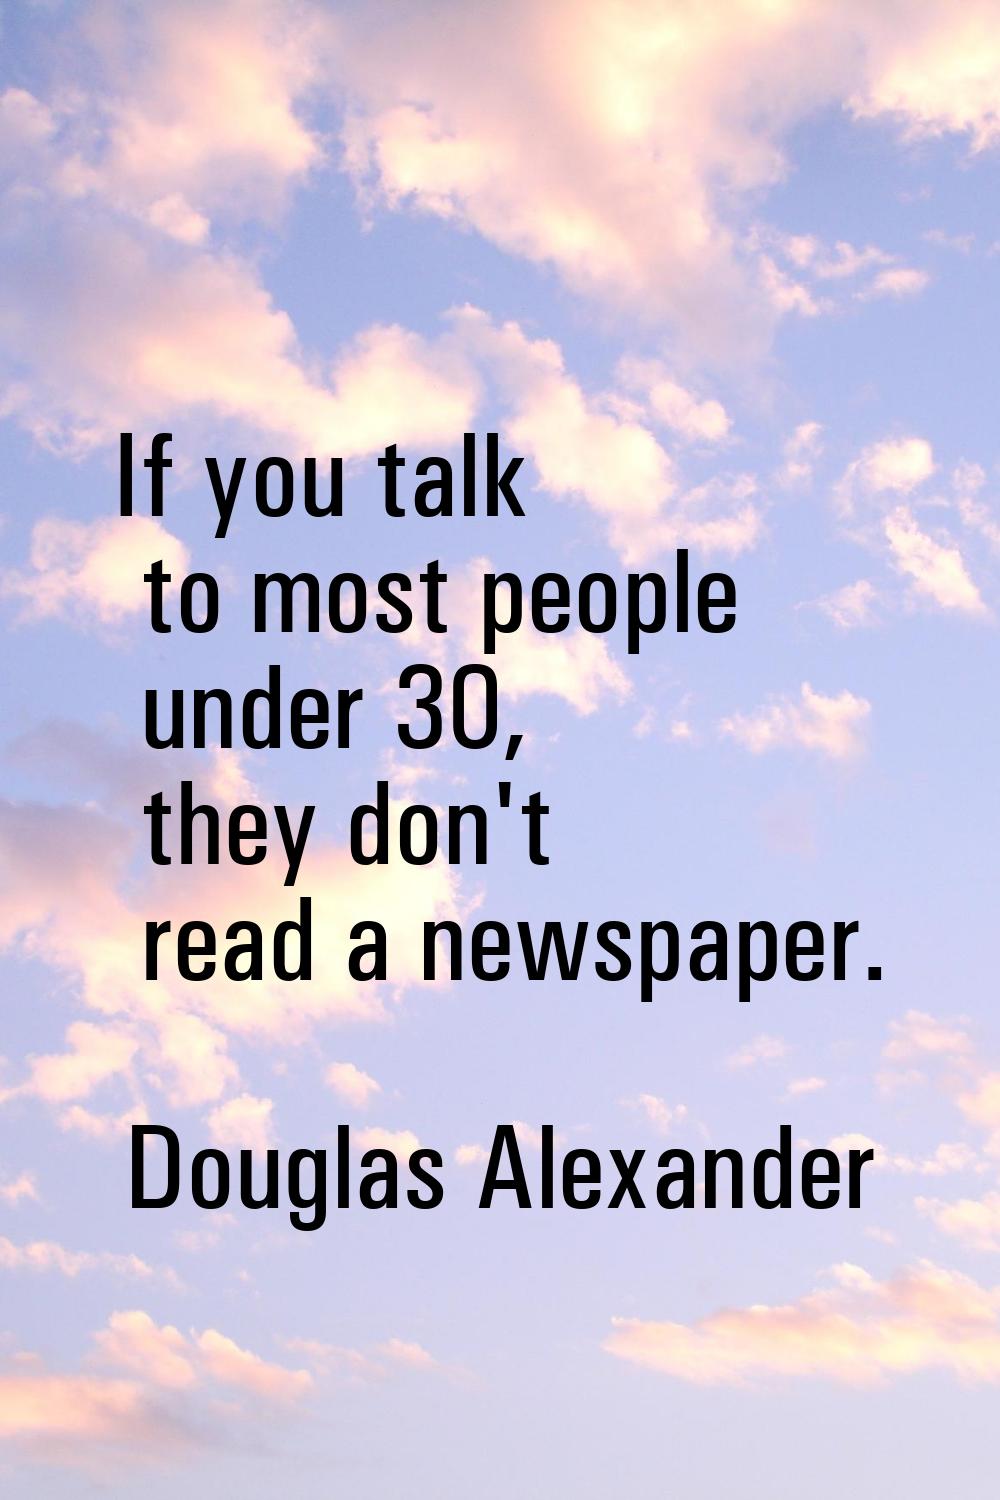 If you talk to most people under 30, they don't read a newspaper.